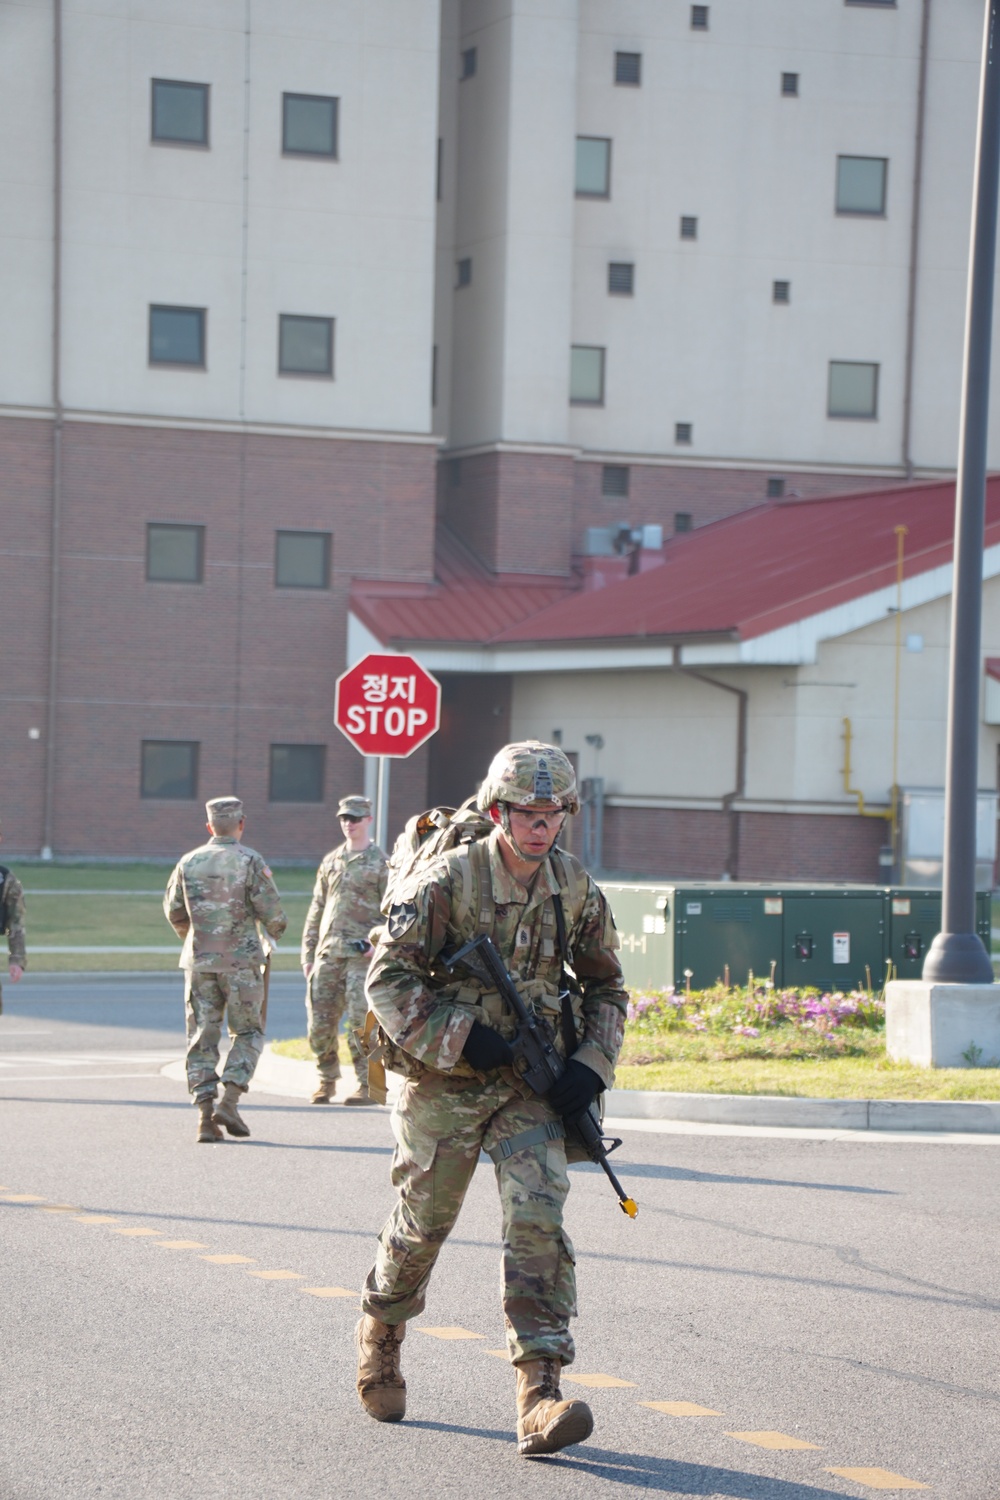 Command Sgt. Major Ryan Cole finishes the EFMB ruck march